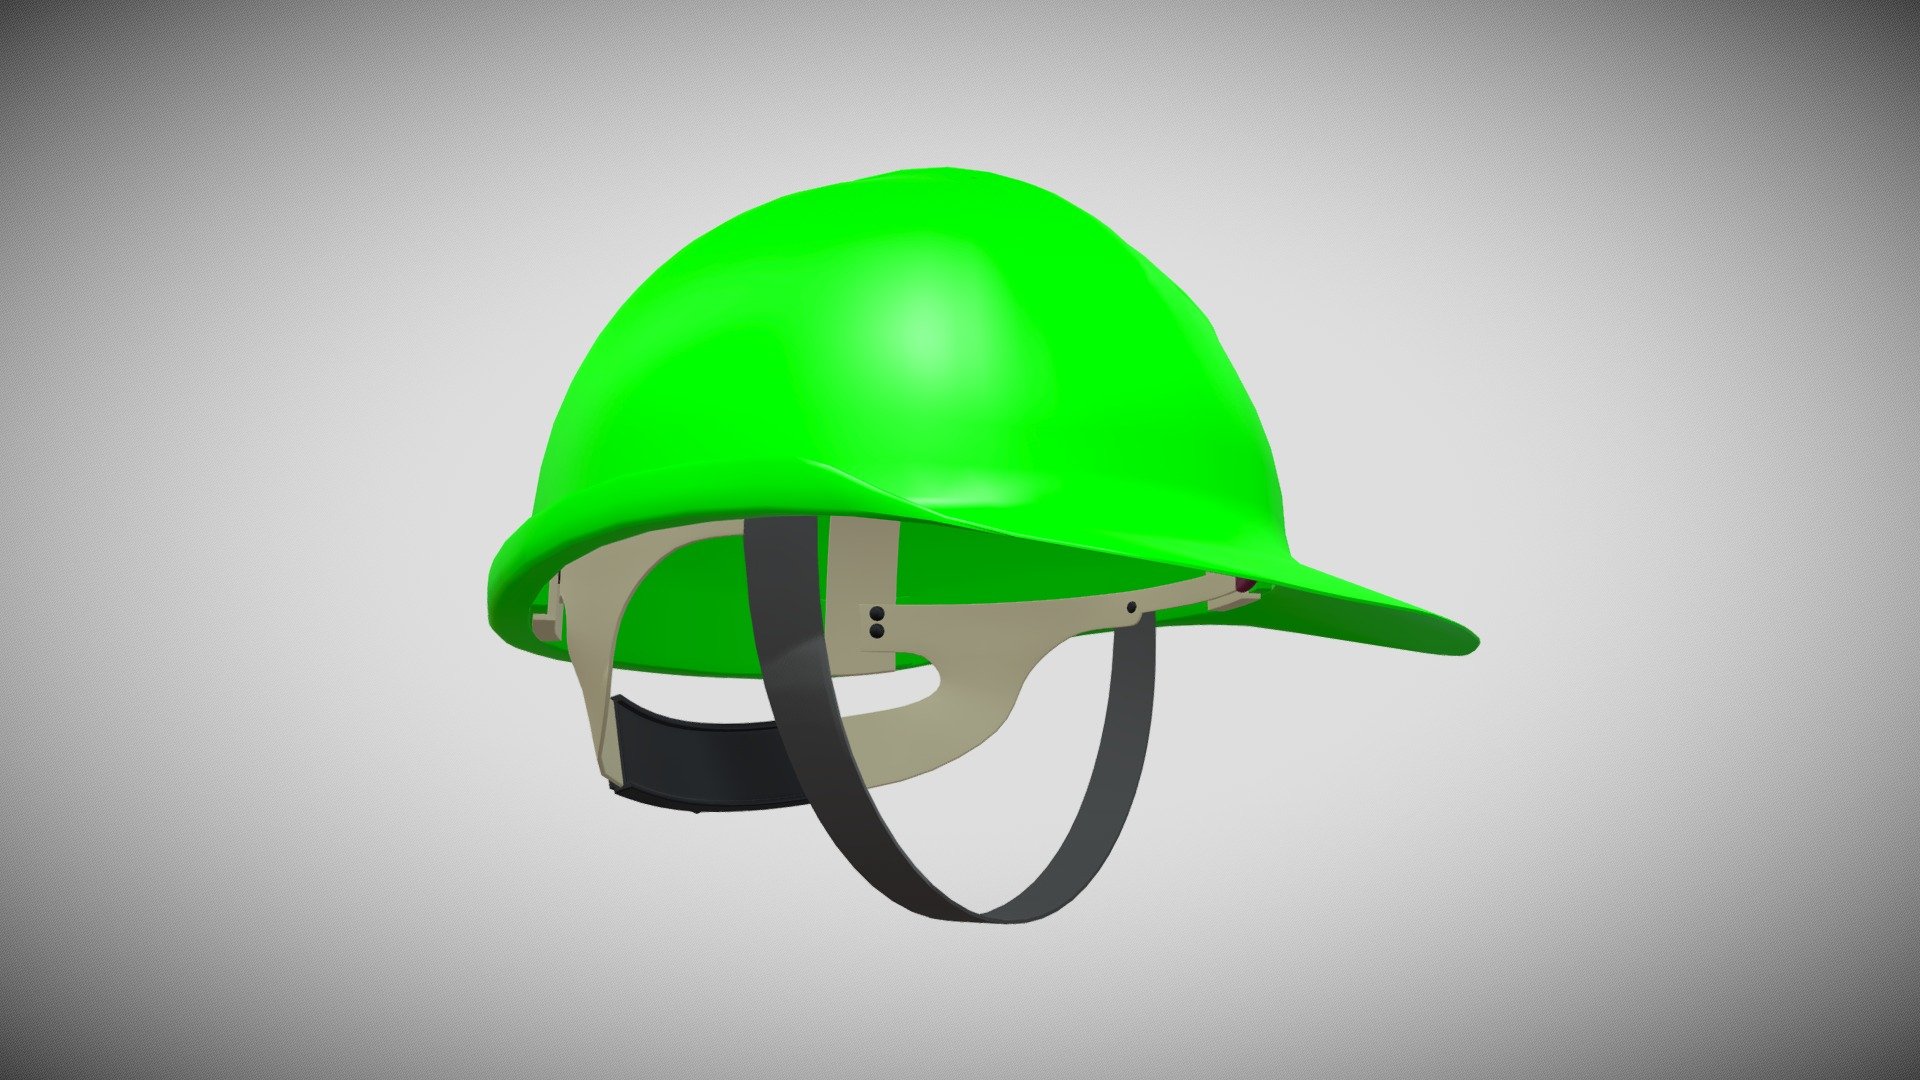 Detailed model of a Safety Helmet, modeled in Cinema 4D.The model was created using approximate real world dimensions.

The model has 19,328 polys and 19,382 vertices.

An additional file has been provided containing the original Cinema 4D project files with both standard and v-ray materials, textures and other 3d export files such as 3ds, fbx and obj 3d model